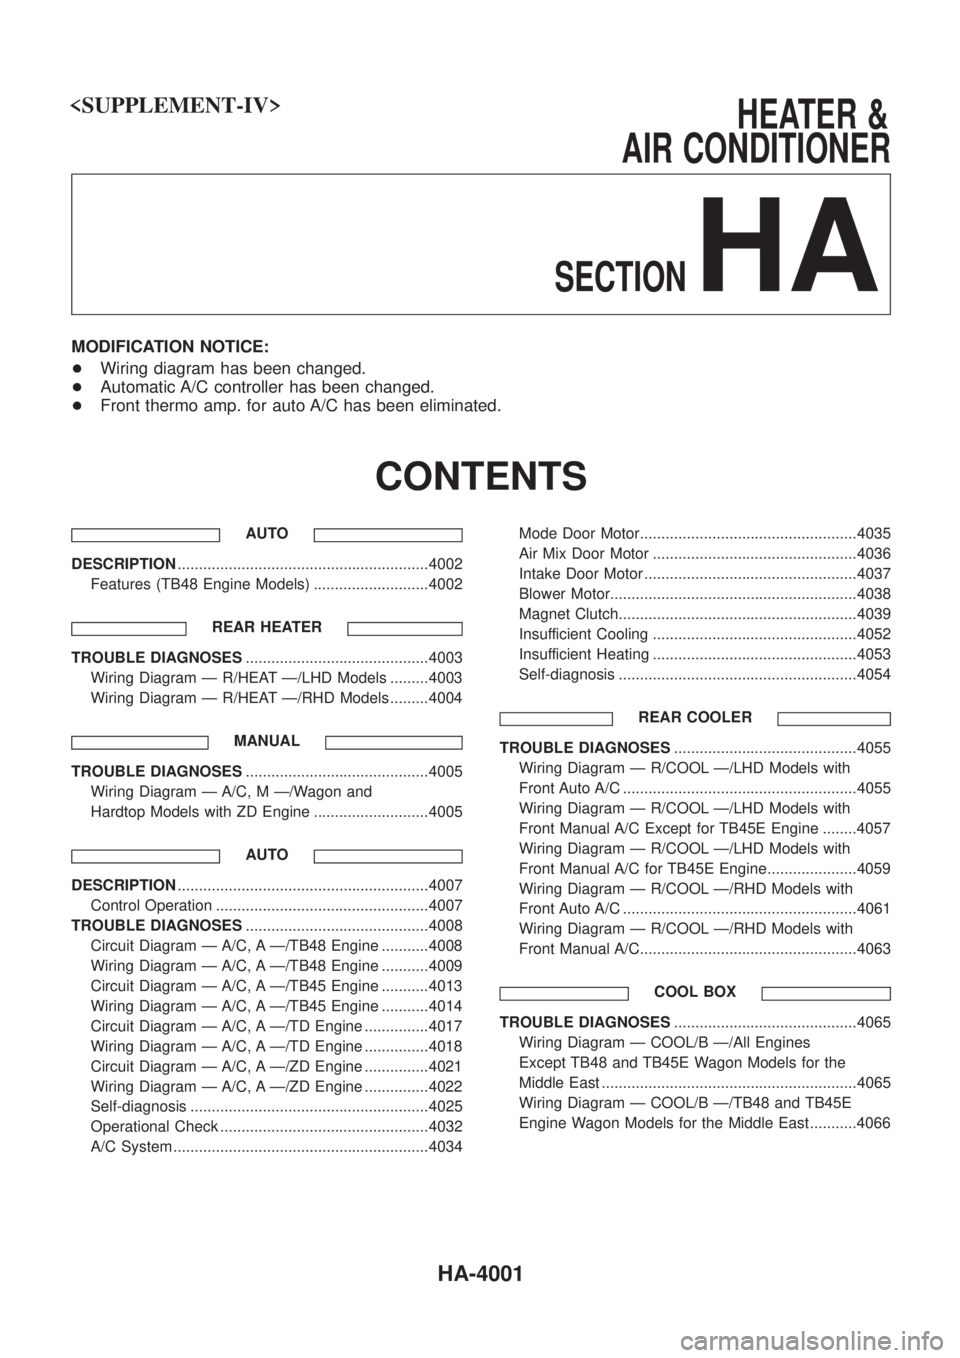 NISSAN PATROL 2004  Electronic Owners Manual <SUPPLEMENT-IV>                                                                        \
          HEATER&
AIR CONDITIONER
SECTION
HA
MODIFICATION NOTICE:
+ Wiring diagram has been changed.
+ Automati